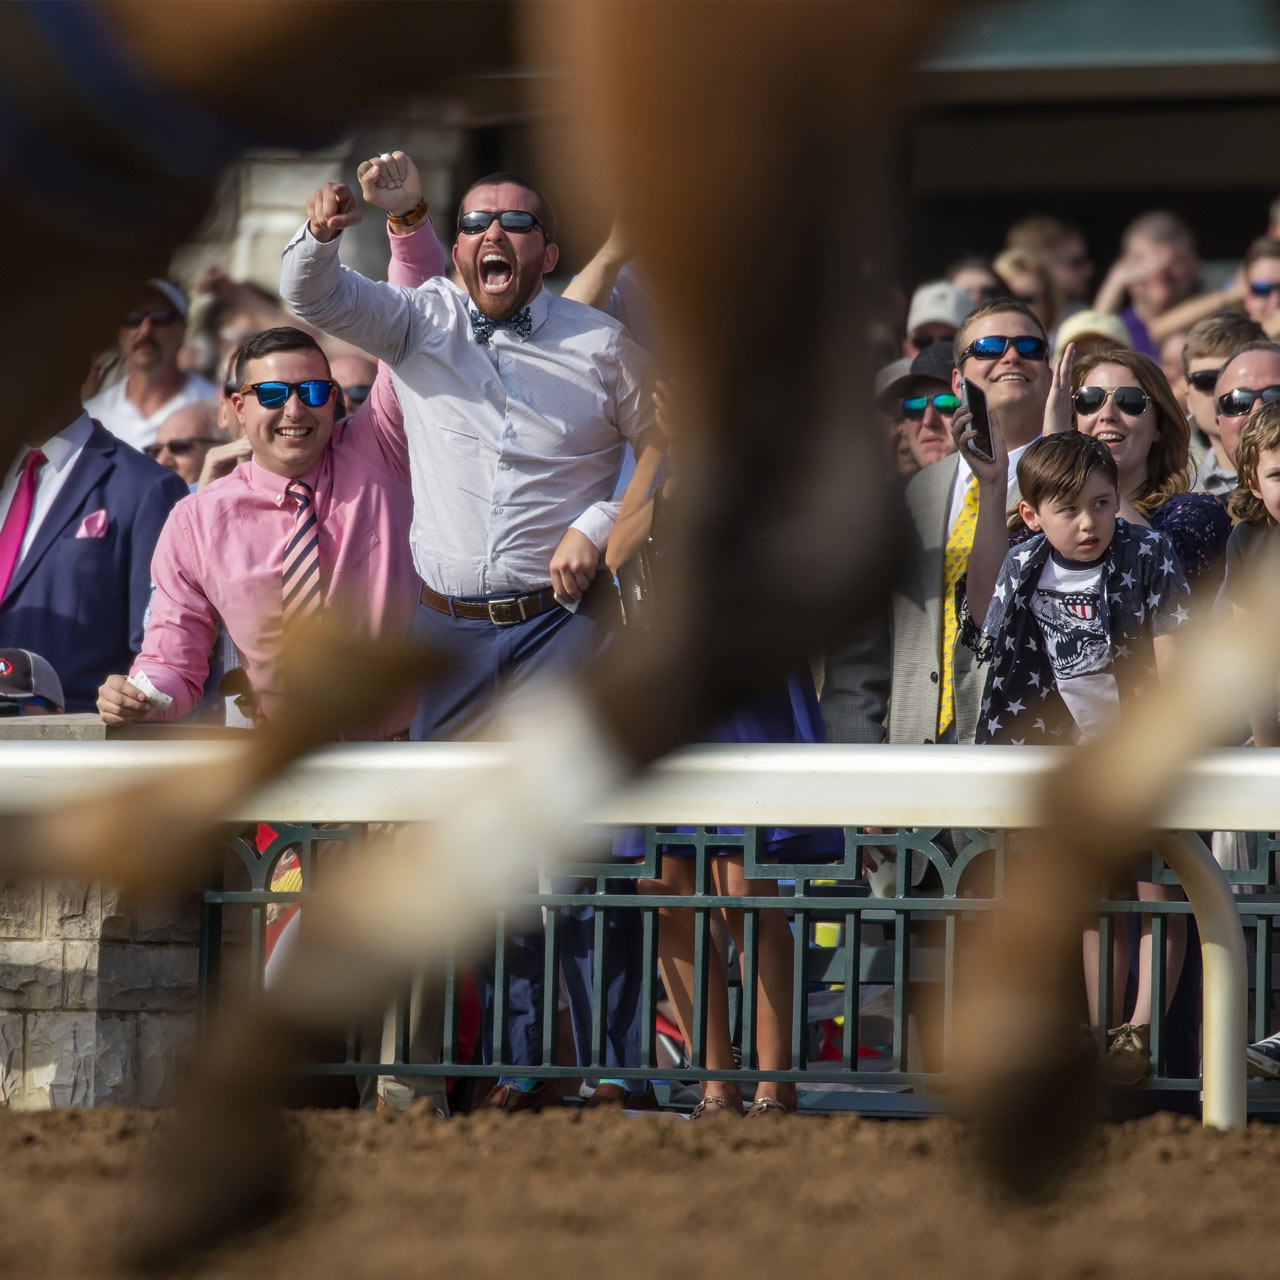 Excited crowd at the track